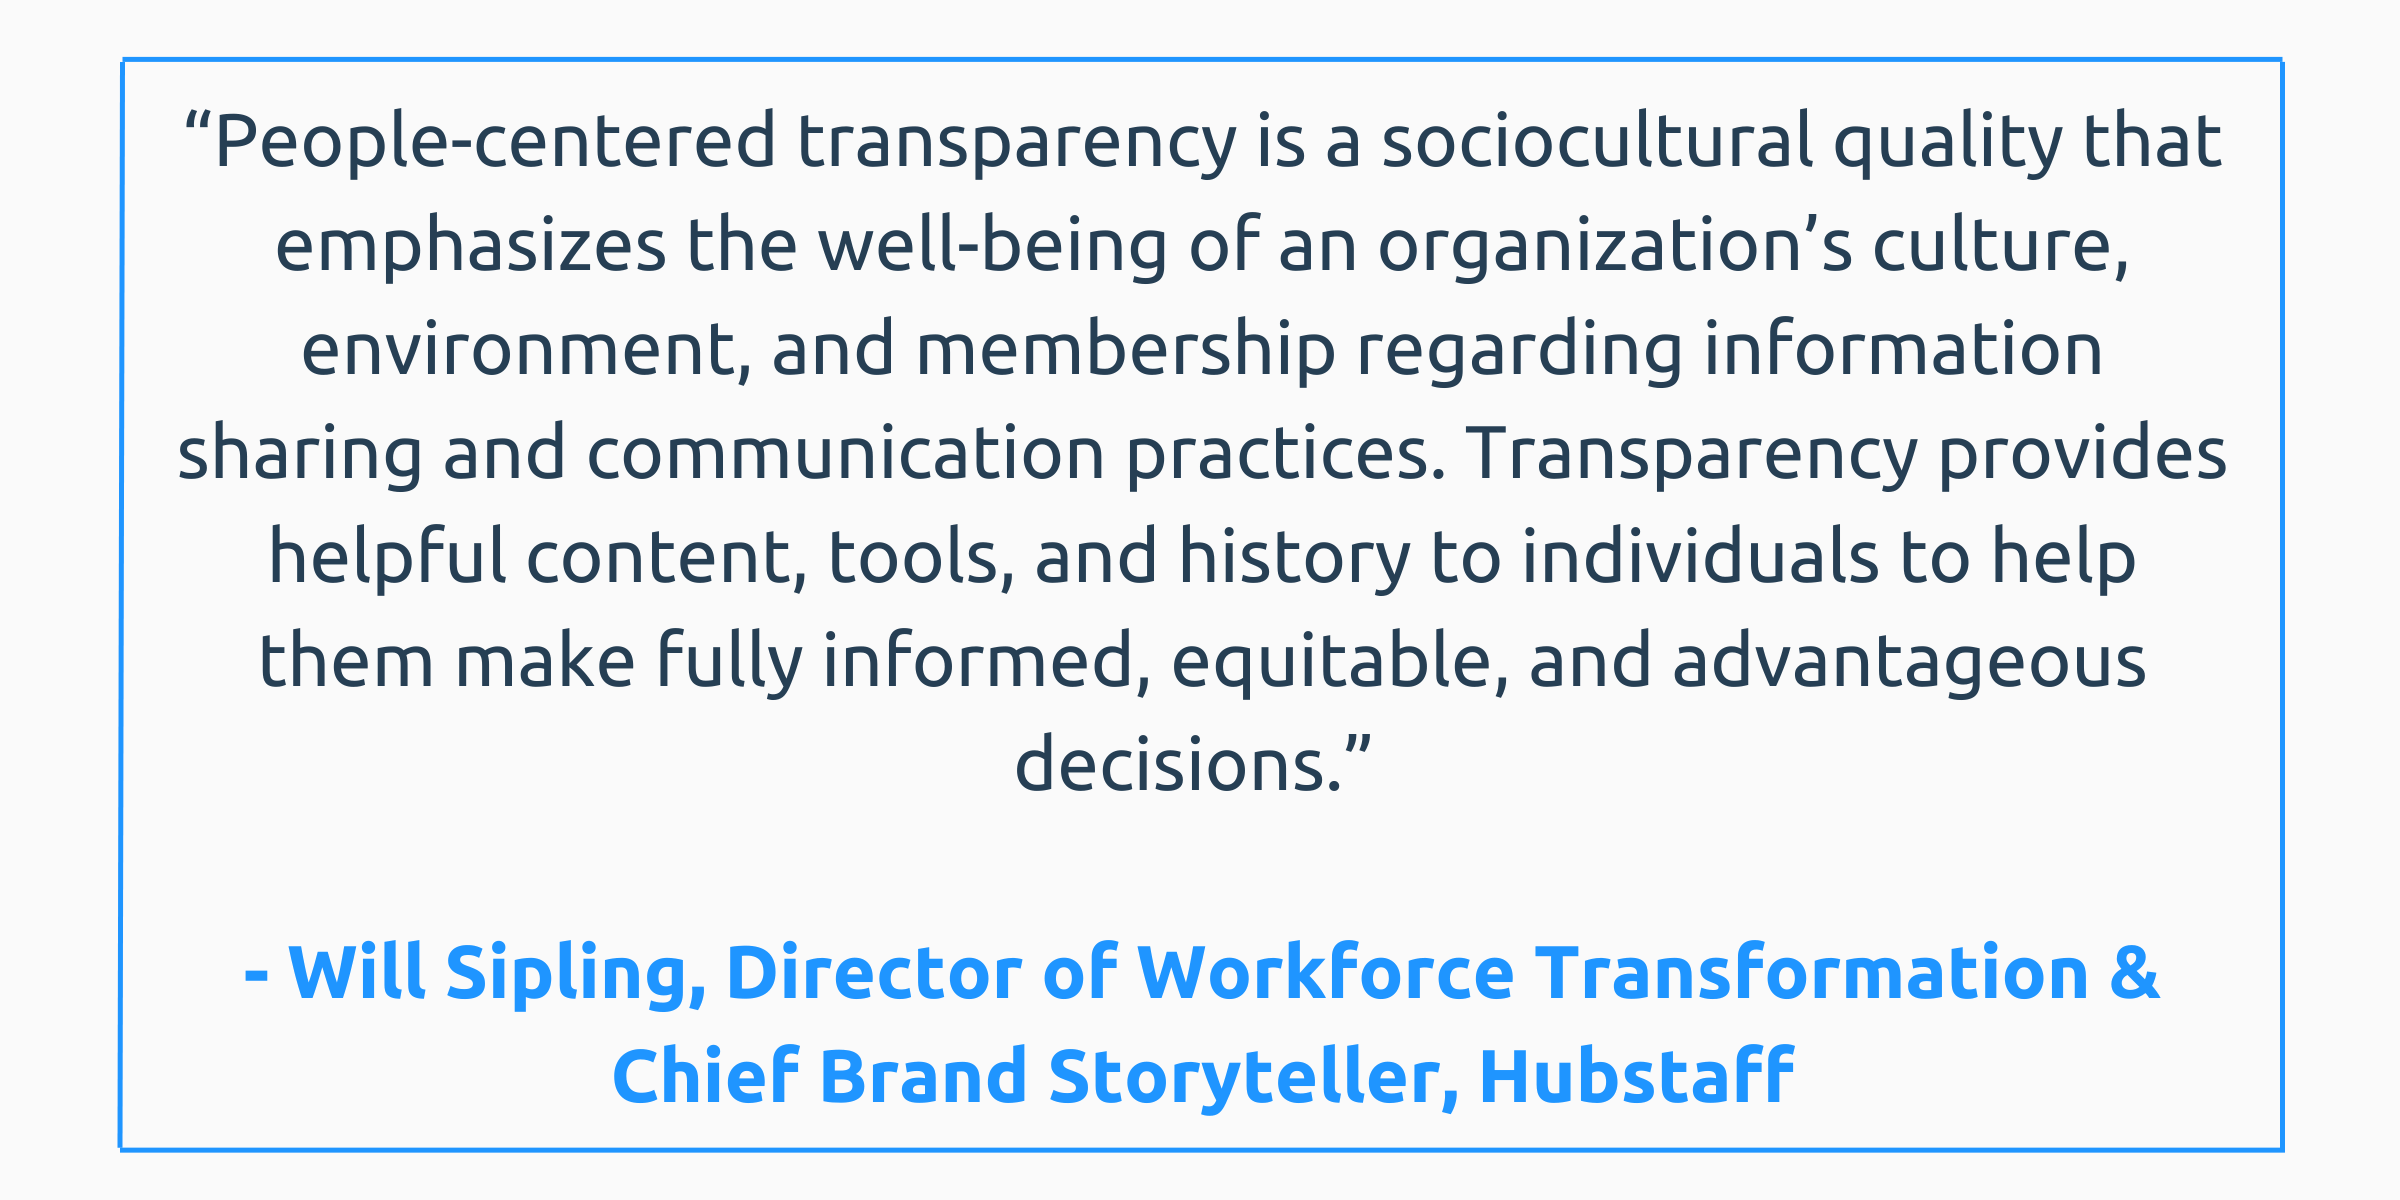 Quote detailing how Hubstaff Director of Workforce Transformation & Chief Brand Storyteller, Will Sipling, views transparency.